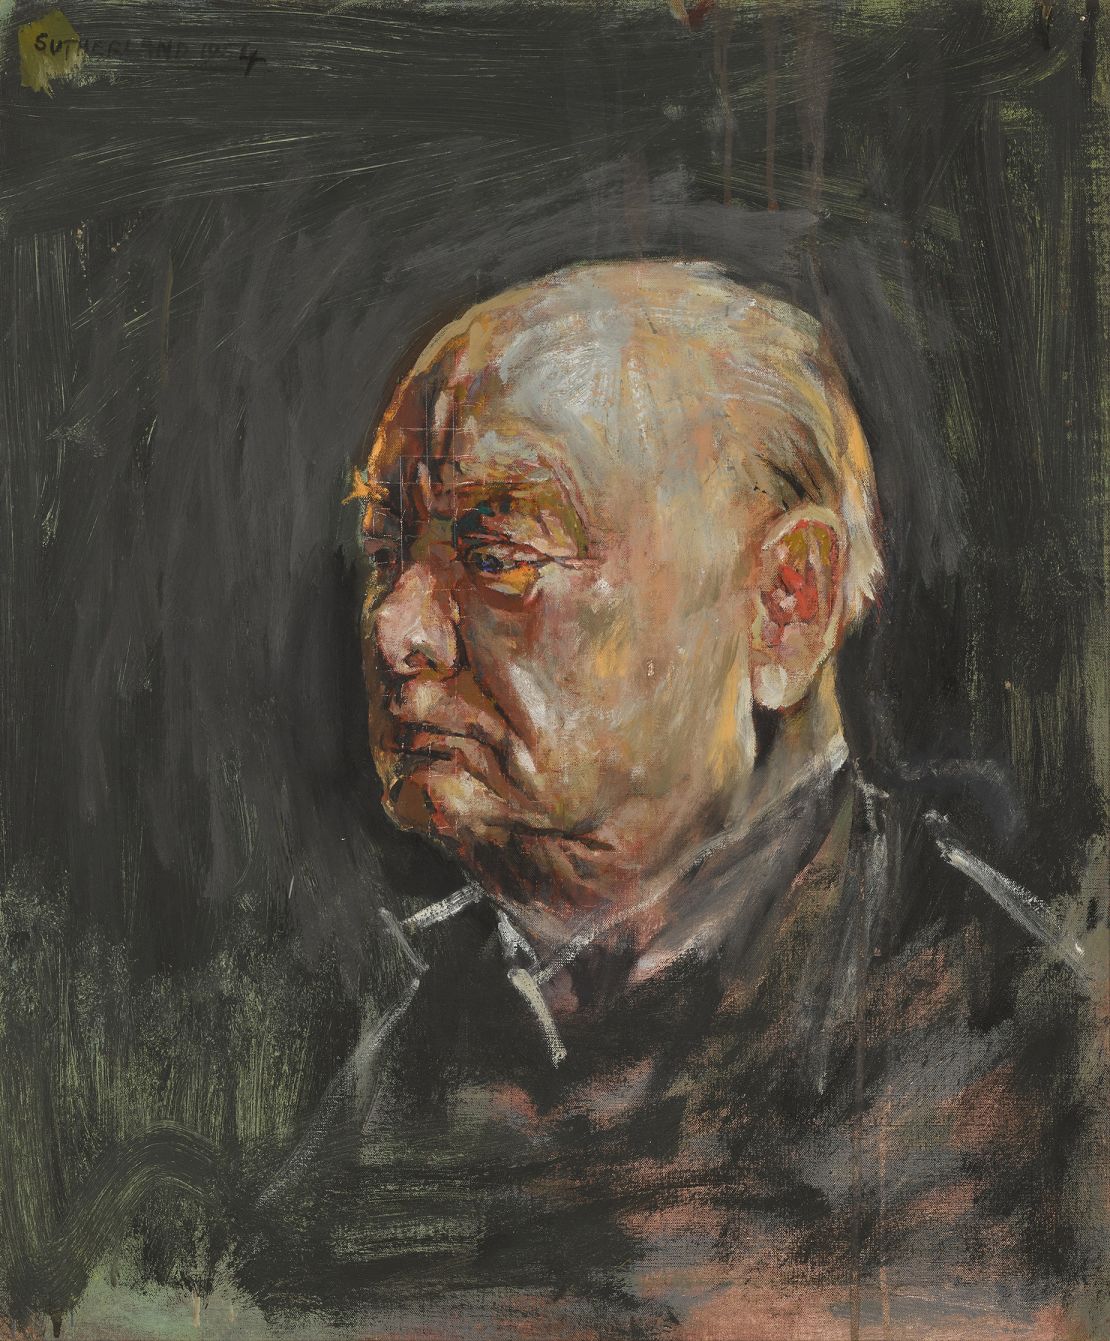 The portrait was displayed at Churchill's birthplace Blenheim Palace near Oxford in the UK, before it travelled to New York and London ahead of its sale.